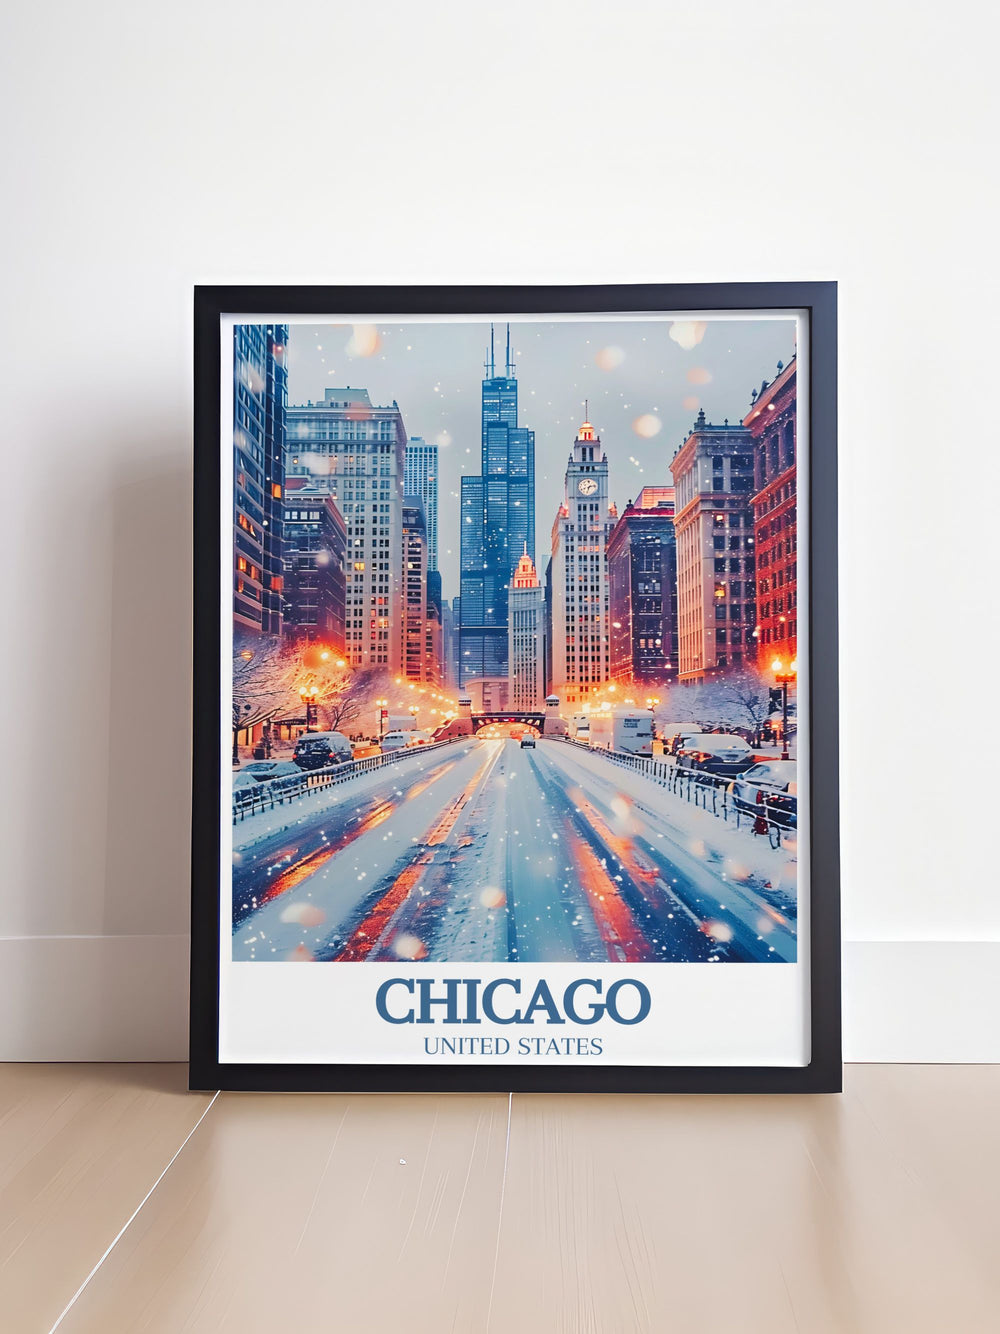 This Magnificent Mile travel poster beautifully captures the vibrant mix of luxury and history. Perfect for adding a lively and sophisticated touch to your decor, this art print reflects the unique skyline and festive spirit of Chicago.